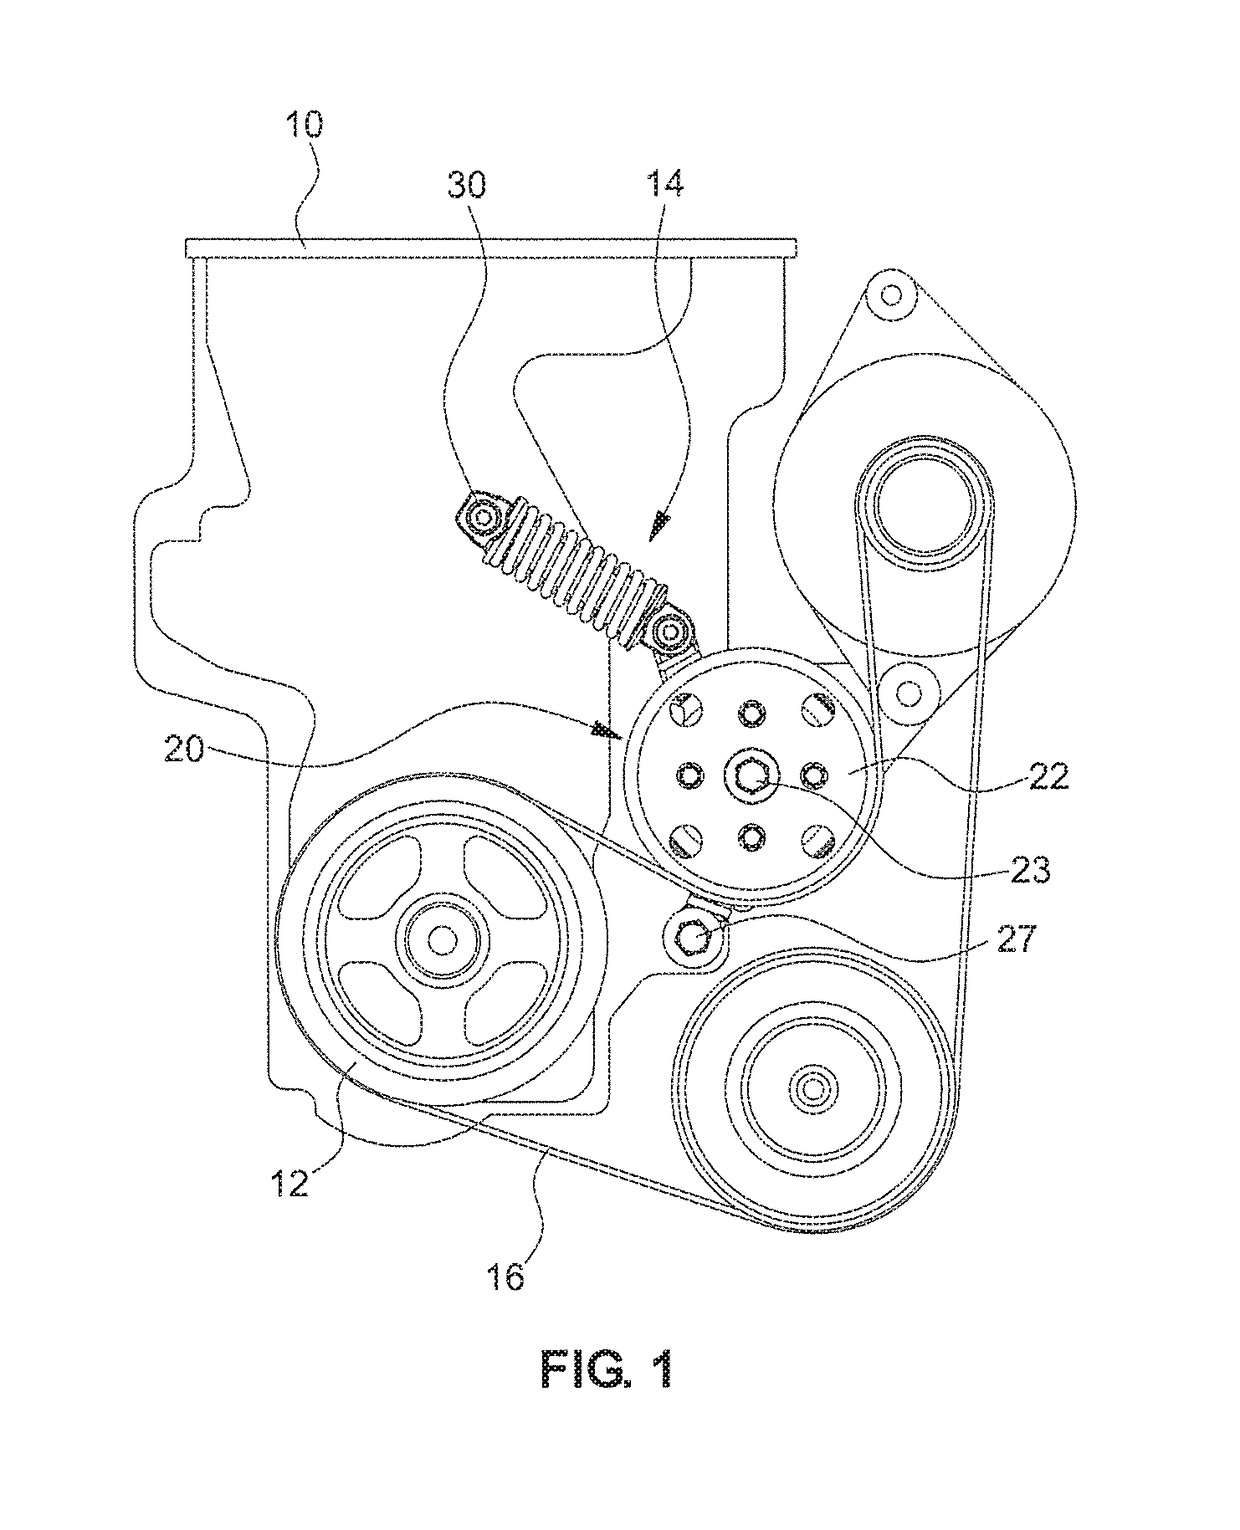 Auto tensioner and auto tensioner-integrated engine auxiliary device